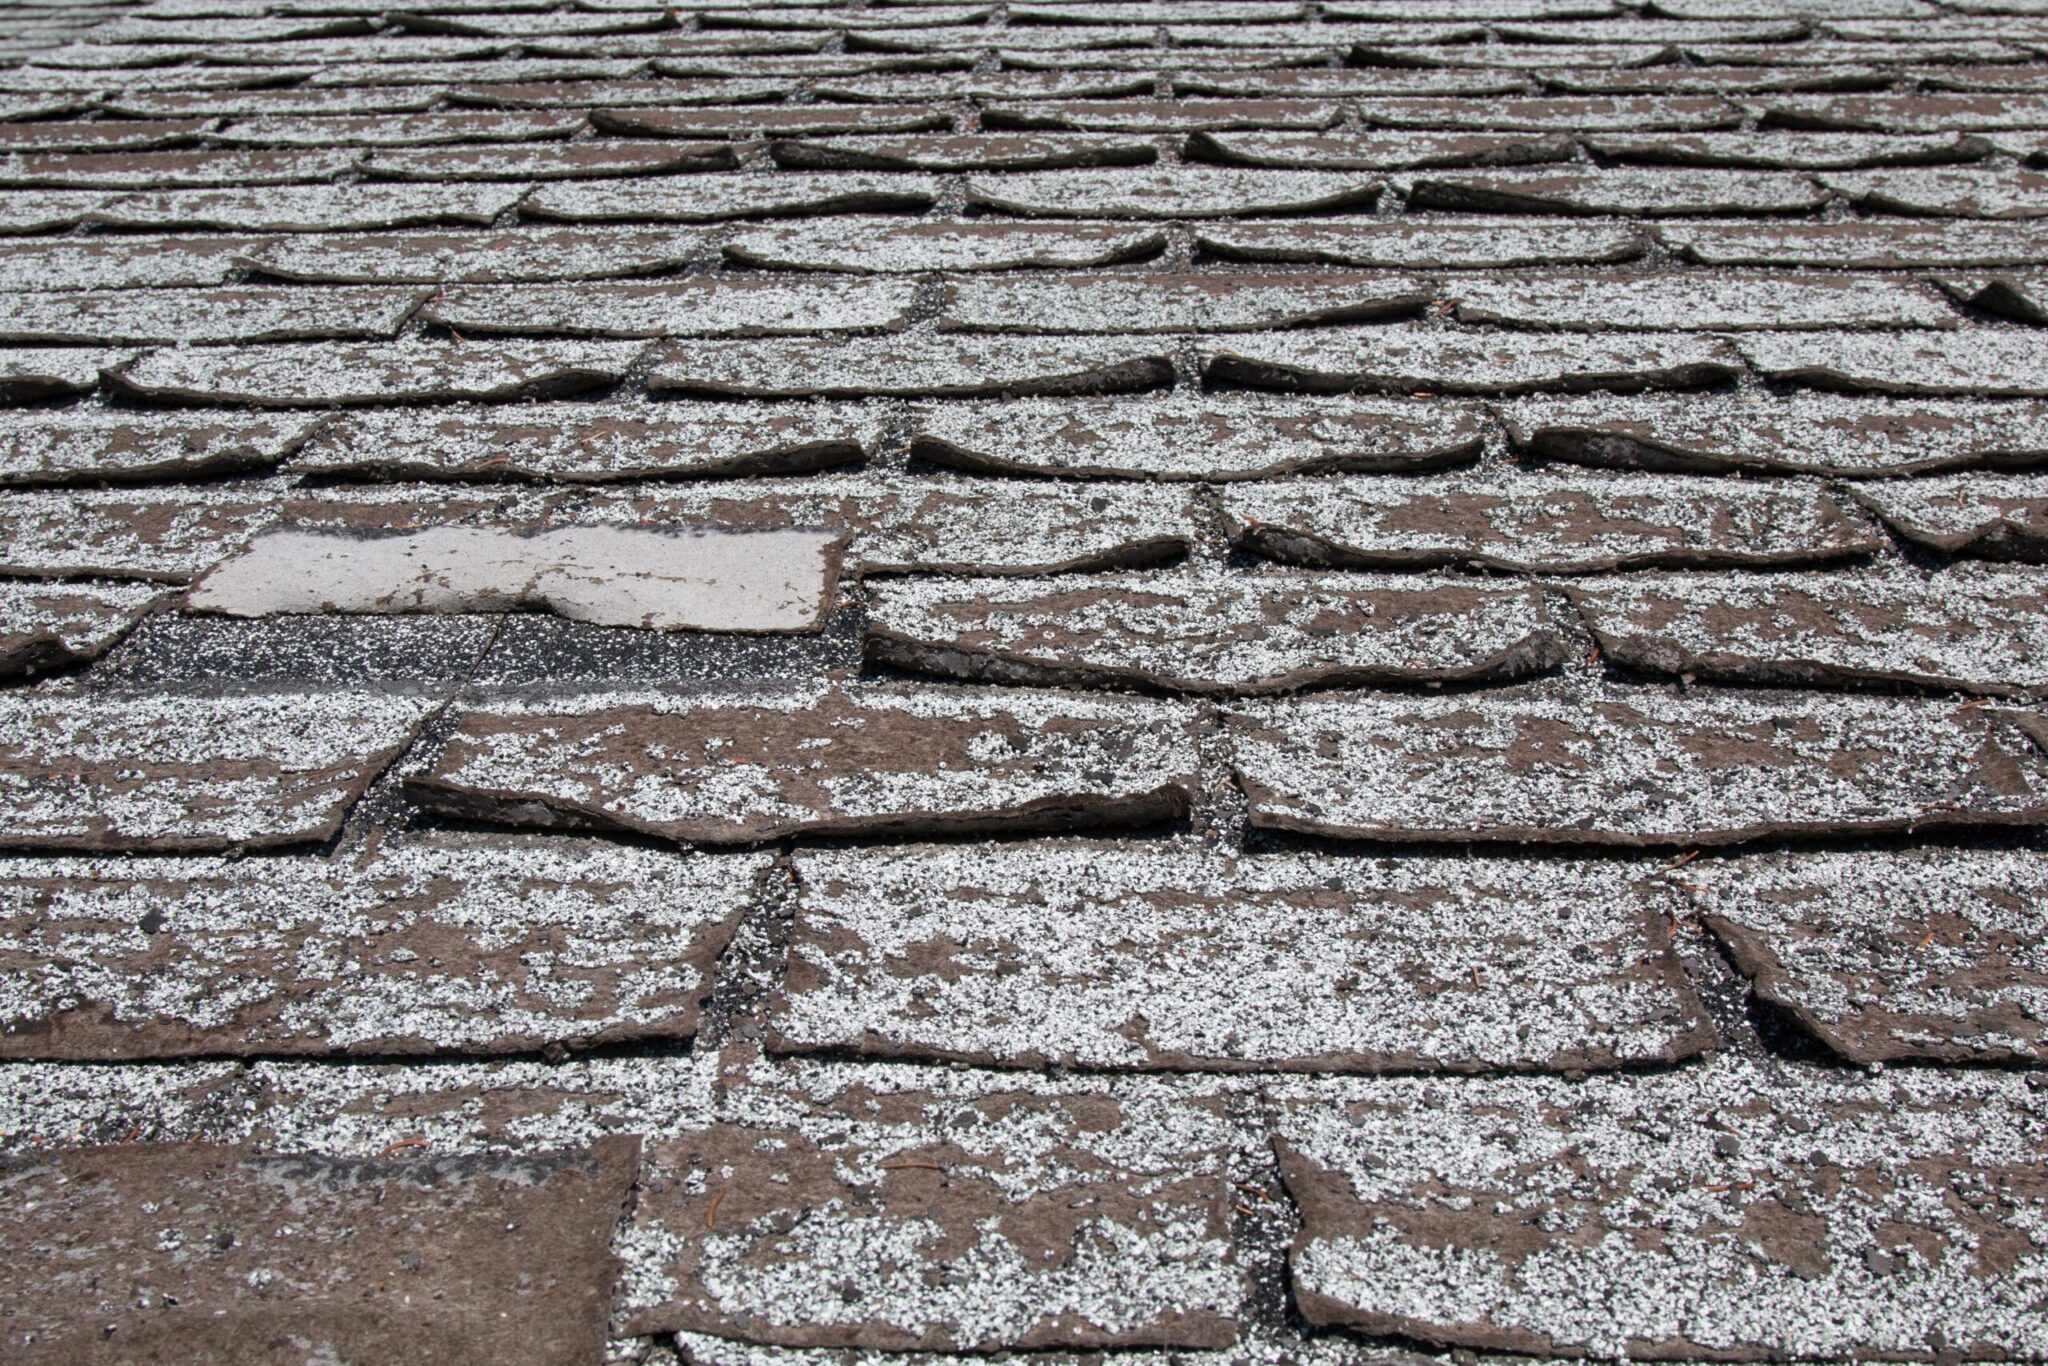 Old worn out asphalt shingles on the roof of a residential home.